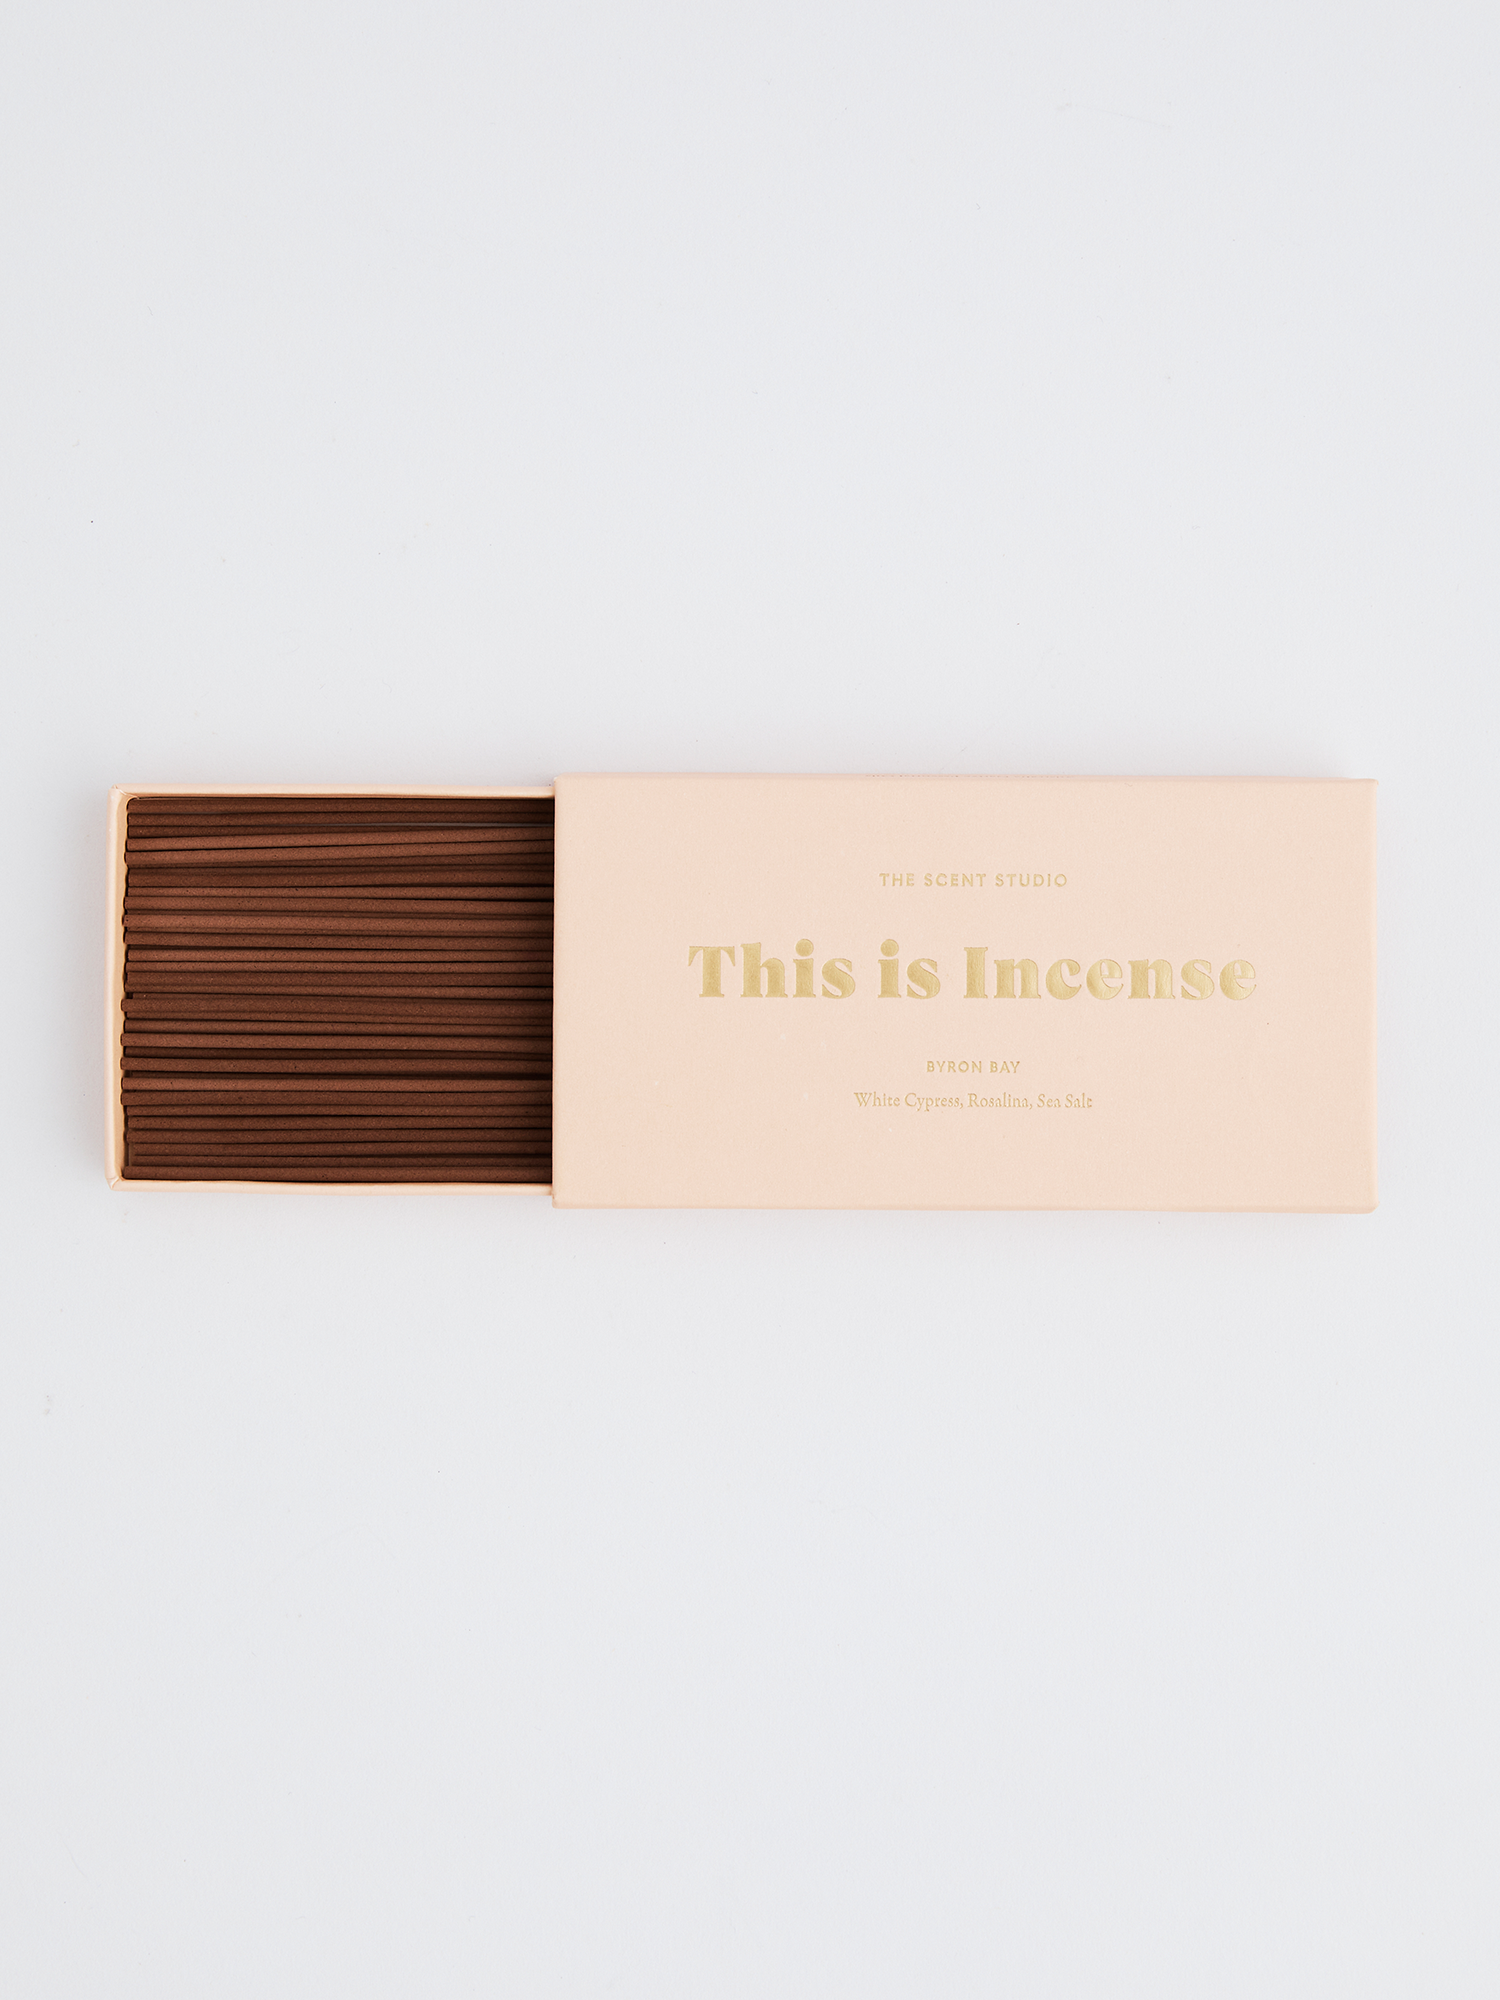 byron bay | this is incense